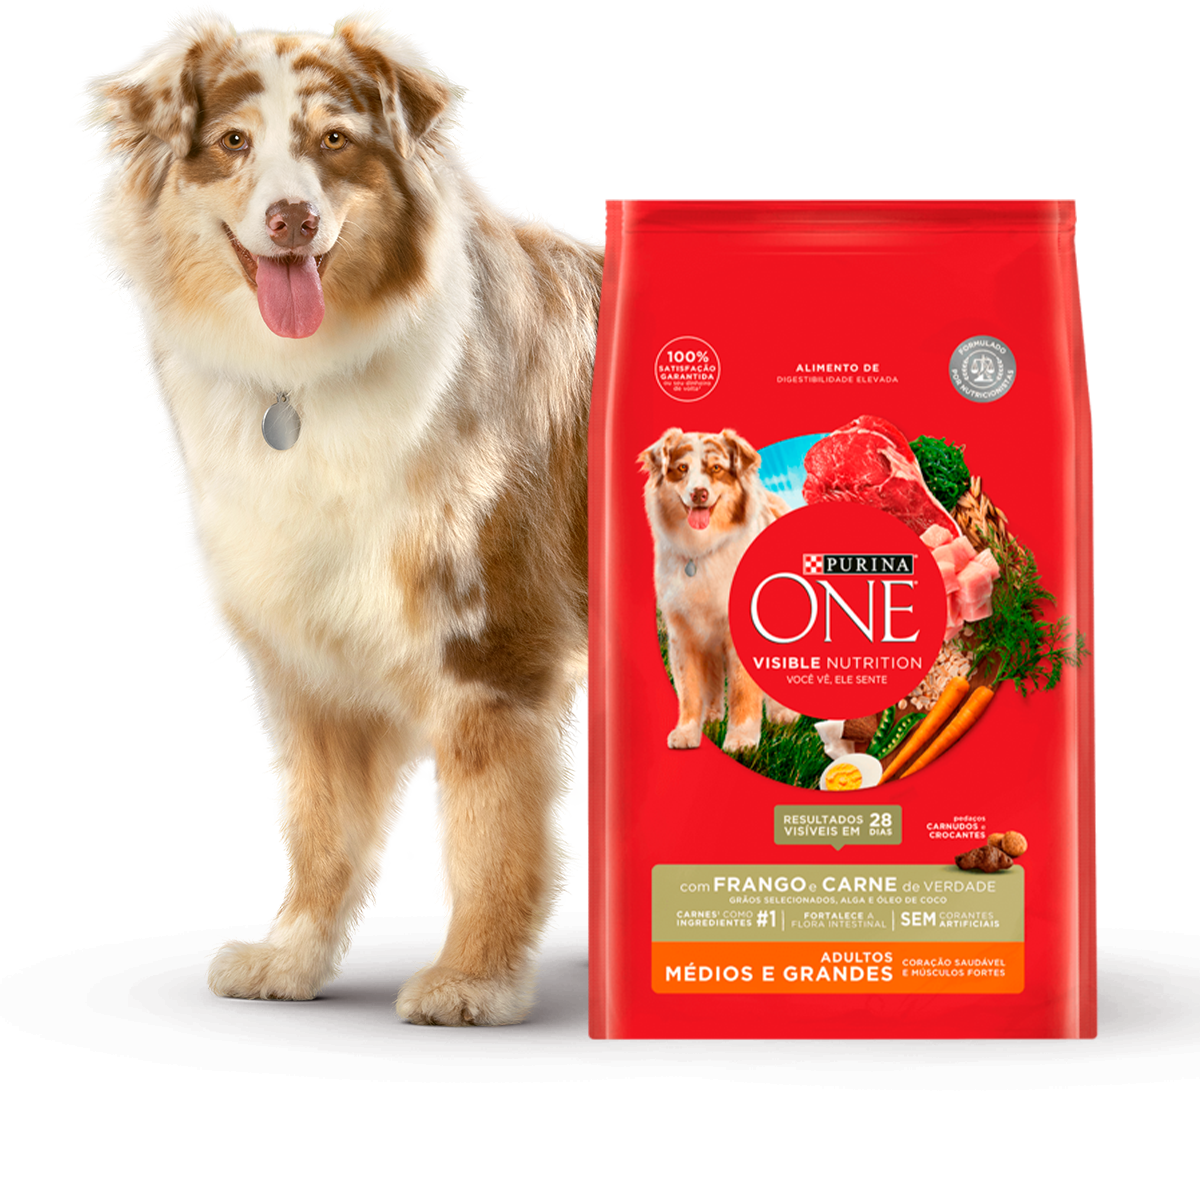 purina-one-productos-perro-rmgcarne.png